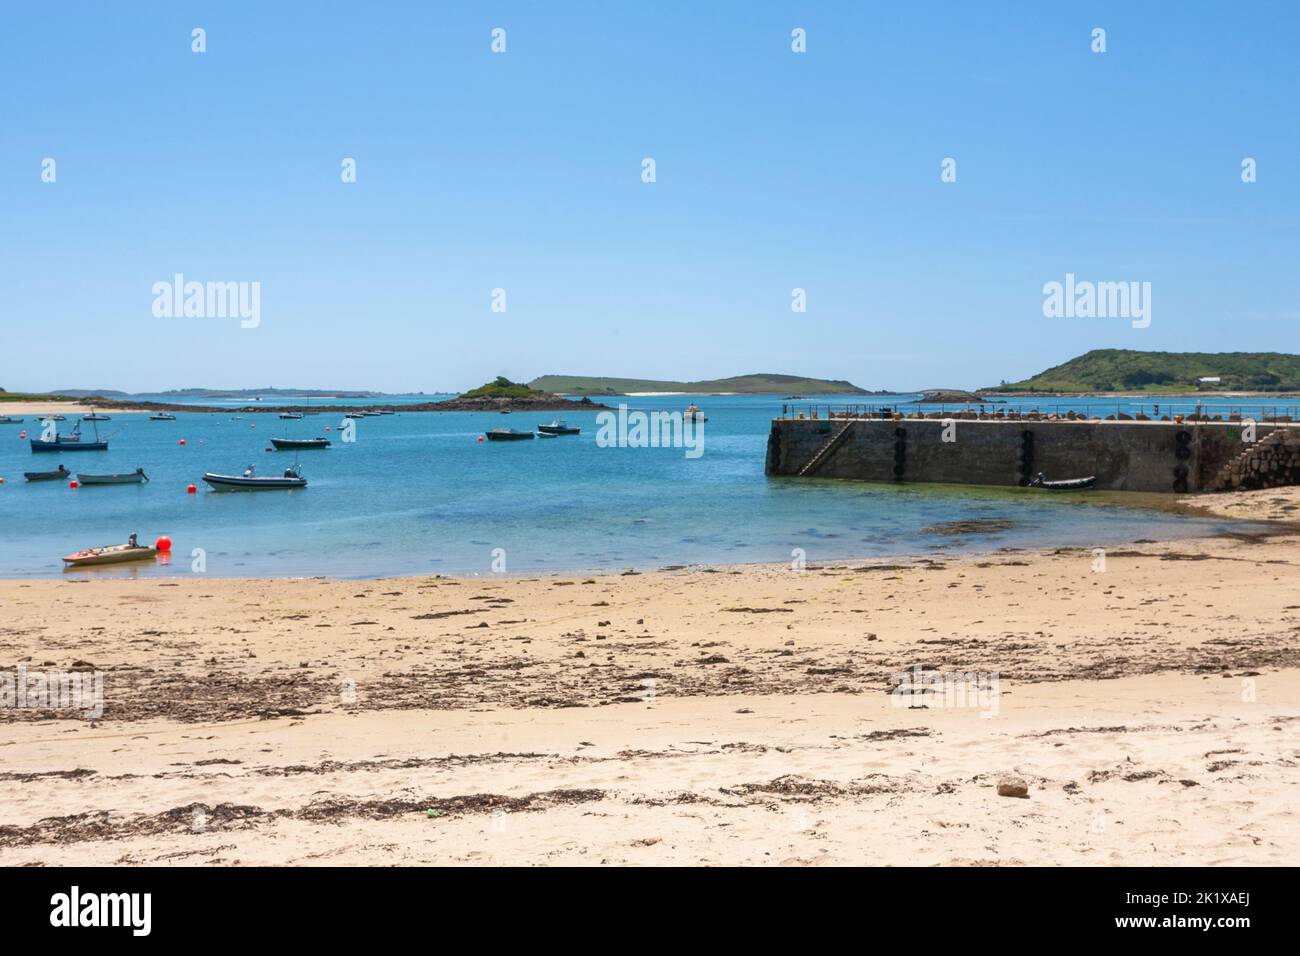 Looking across Tresco Flats from the quay at New Grimsby, Tresco, towards Bryher and Samson, with St. Mary's in the far distance: Isles of Scilly, UK Stock Photo